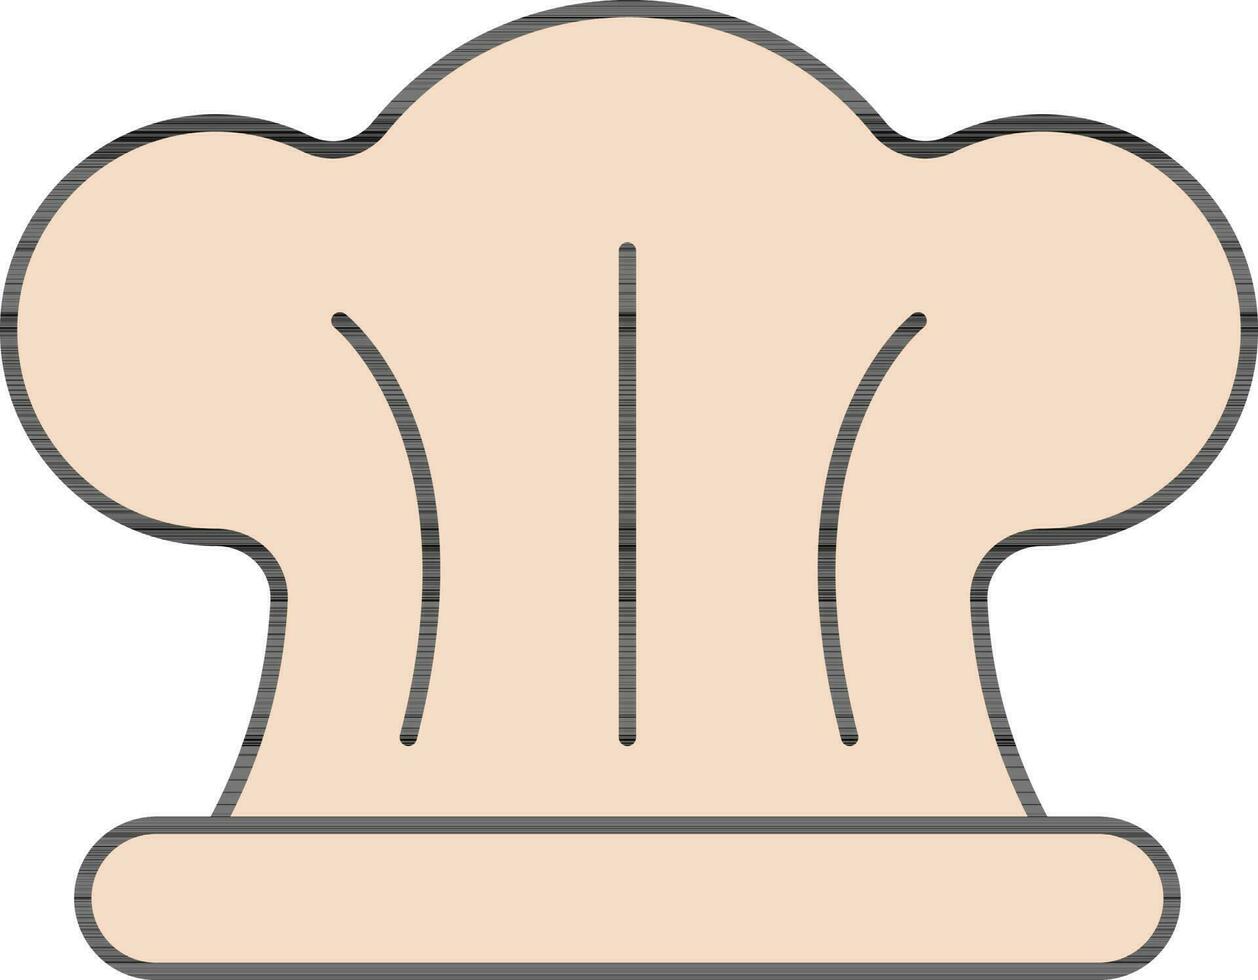 Flat Style Chef Hat Icon In Peach Color. vector